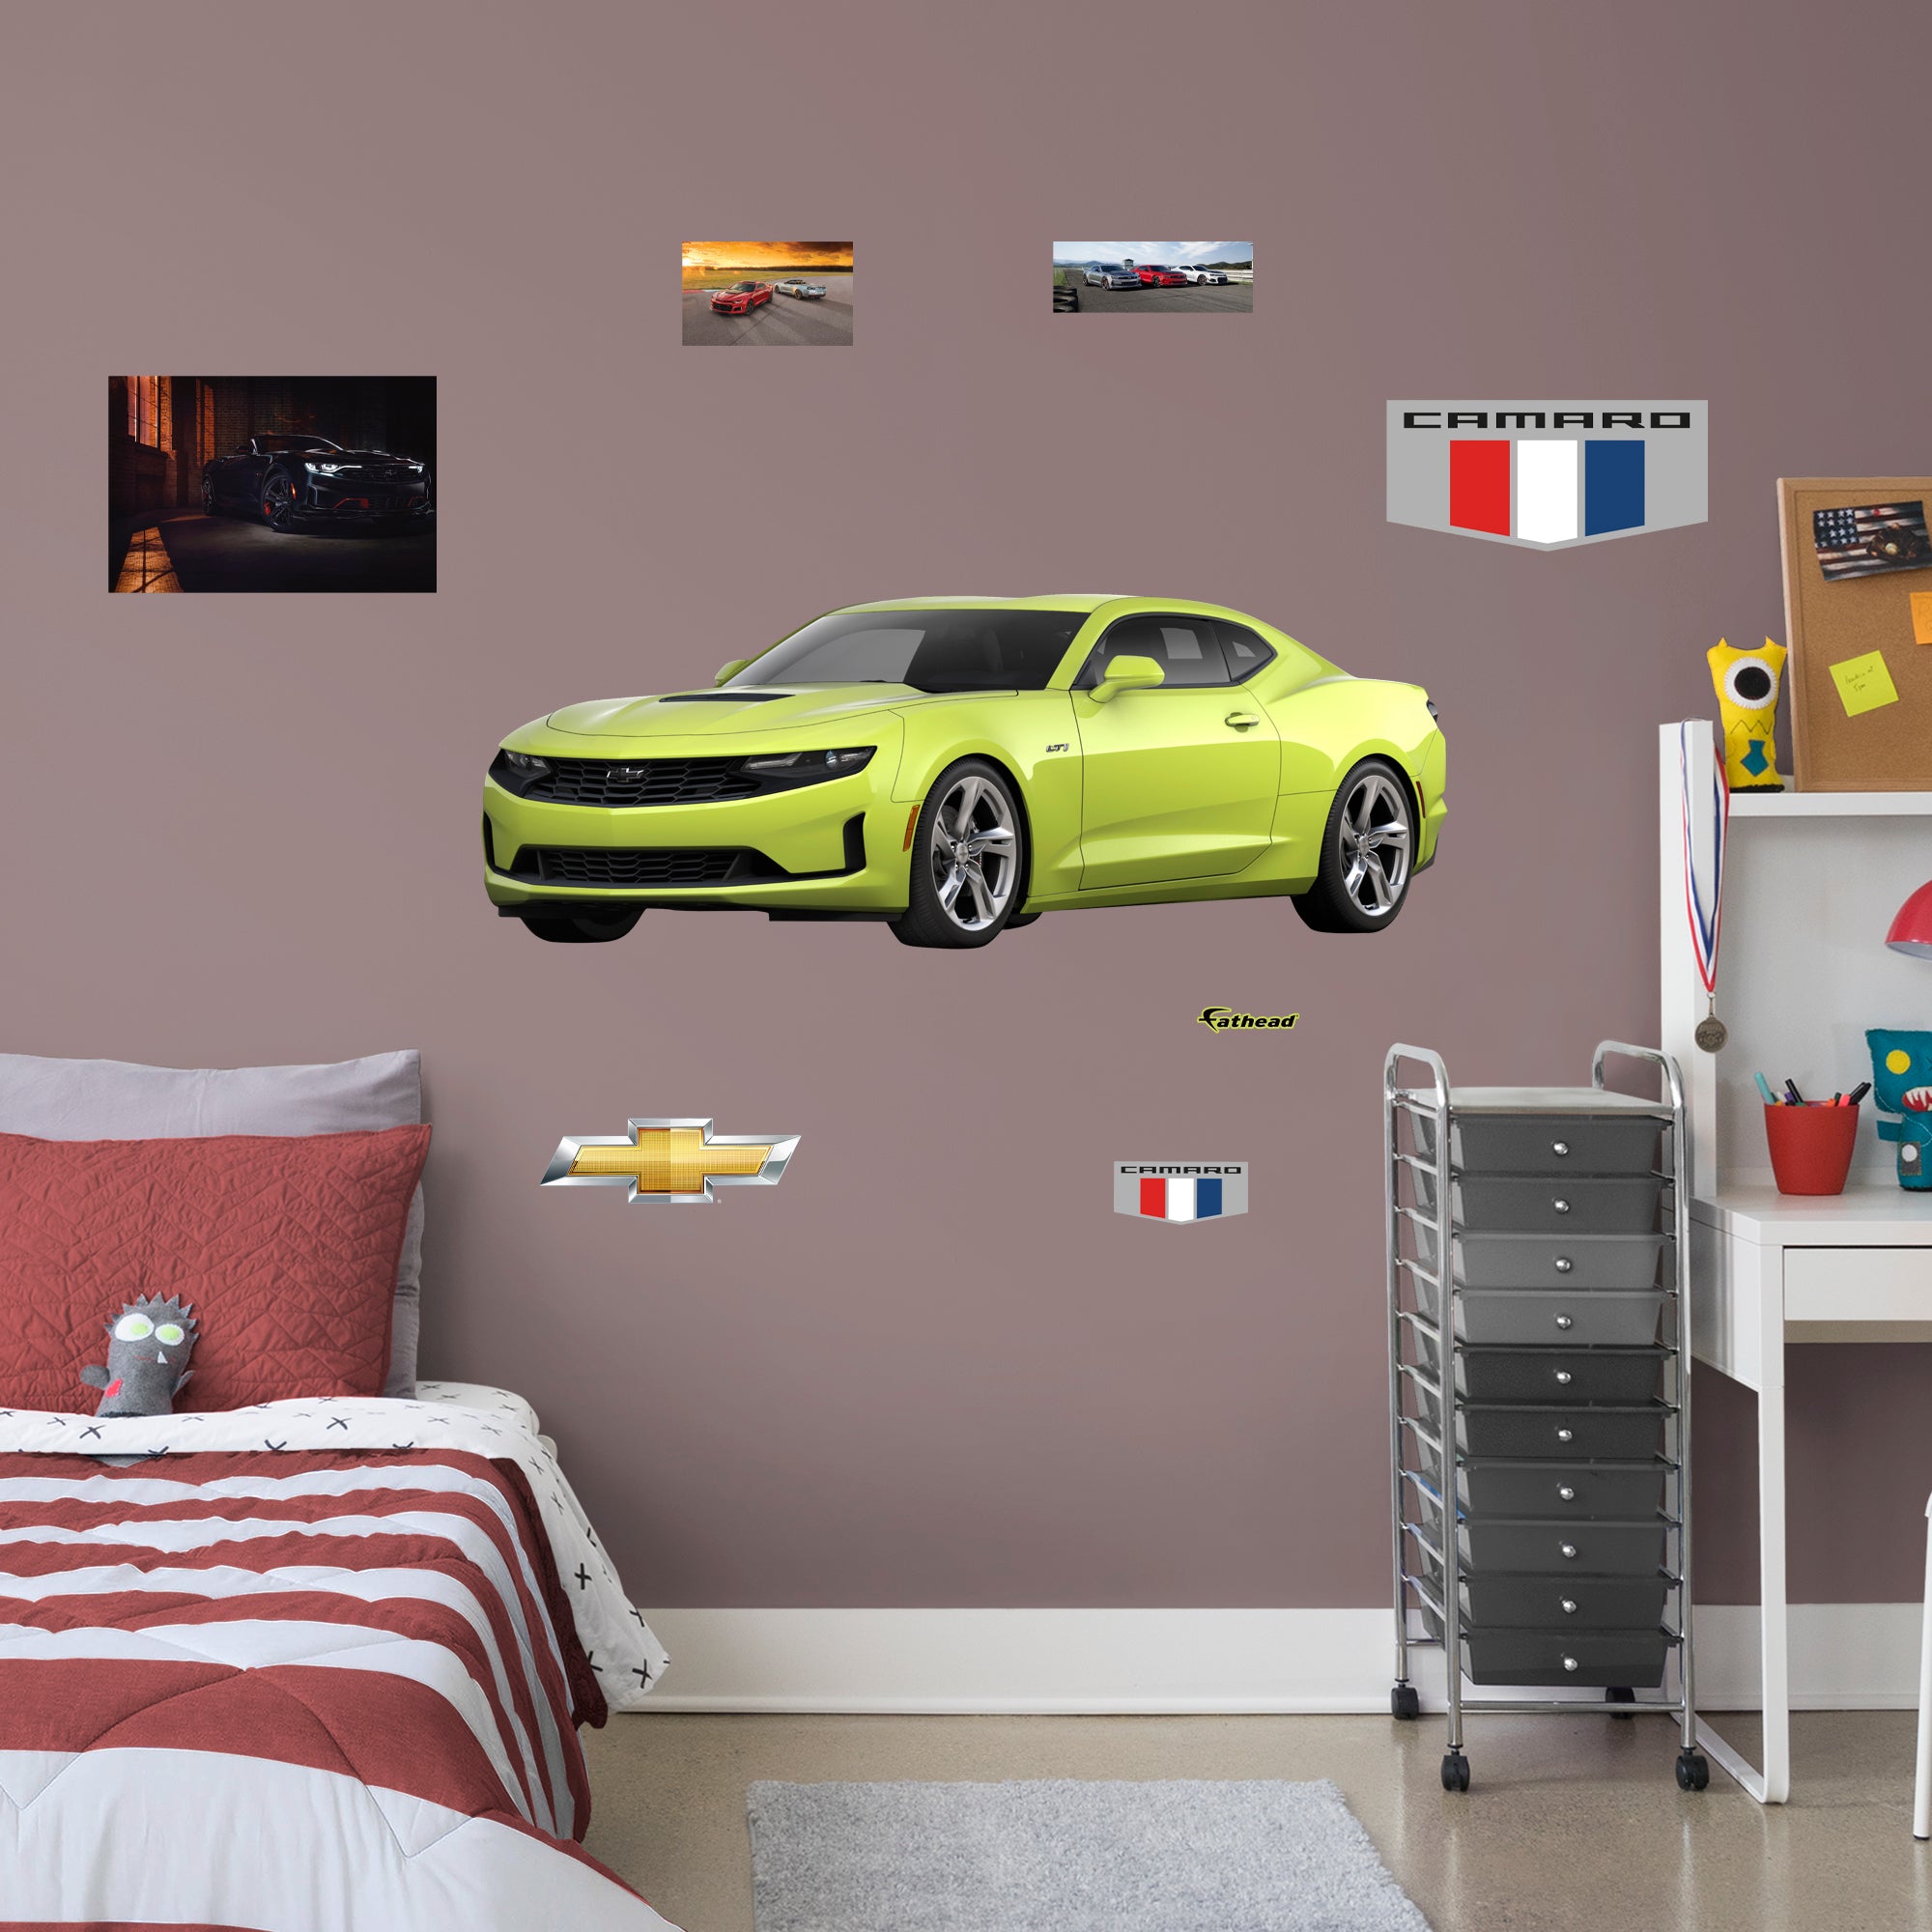 Chevrolet Yellow Camaro: Officially Licensed GM Removable Wall Decal Life-Size + 7 Decals by Fathead | Vinyl